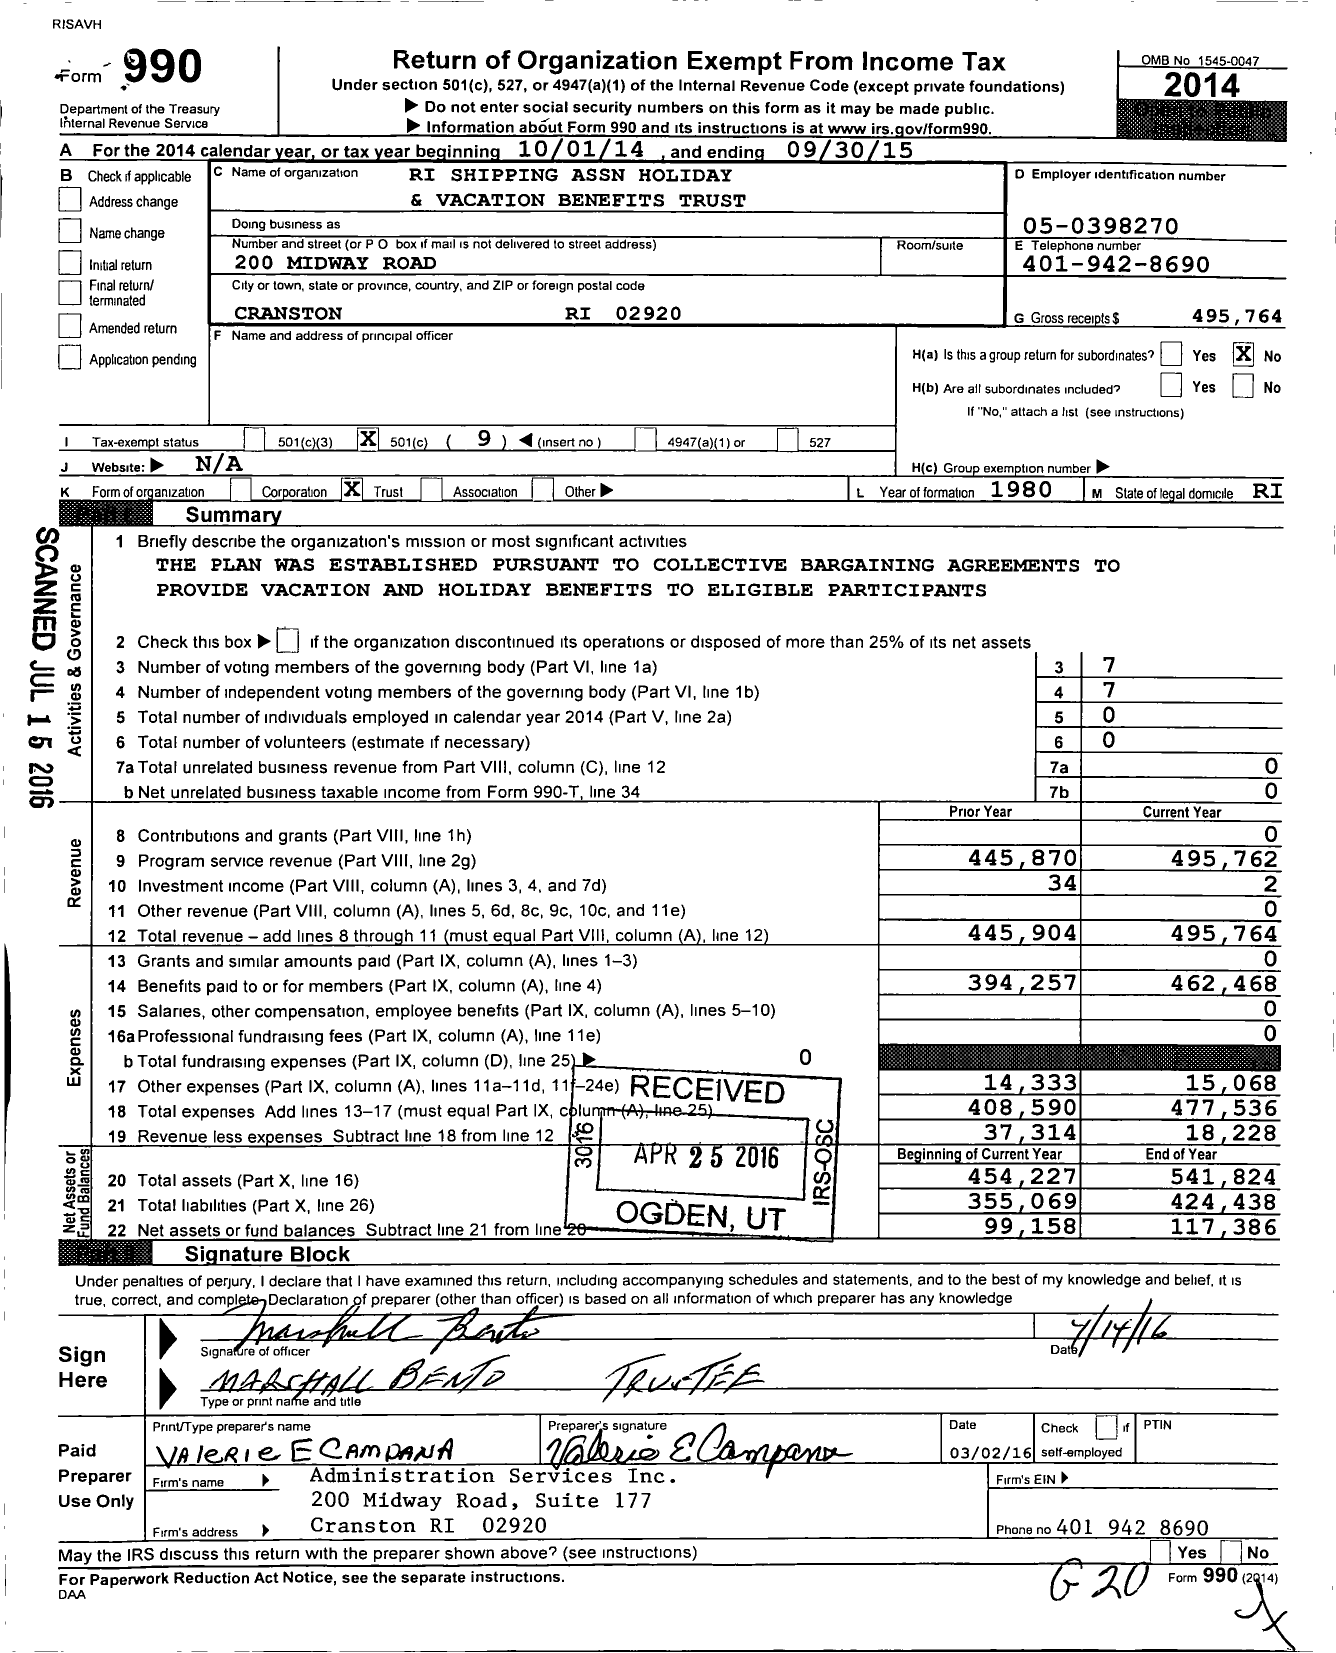 Image of first page of 2014 Form 990O for Ri Shipping Association Holiday and Vacation Benefits Trust